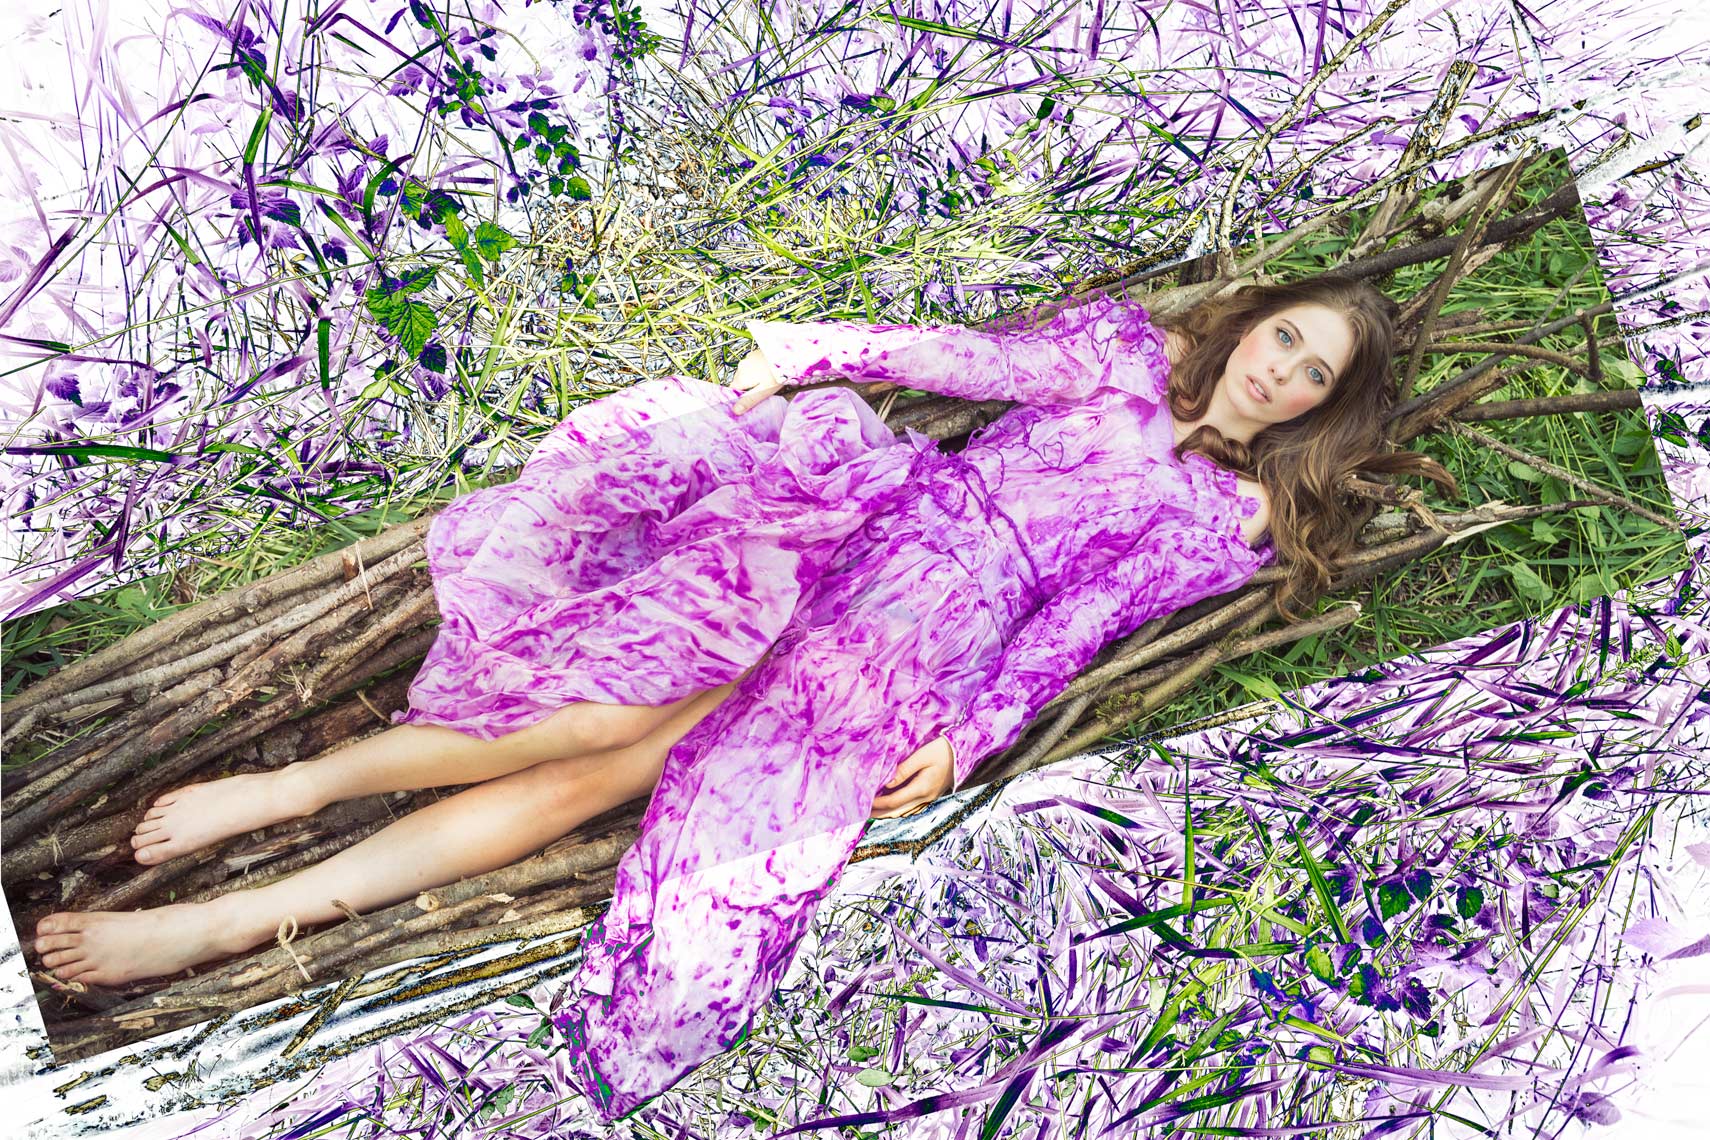 Fashion photography of woman with purple dress laying on boat made of sticks in the grass.